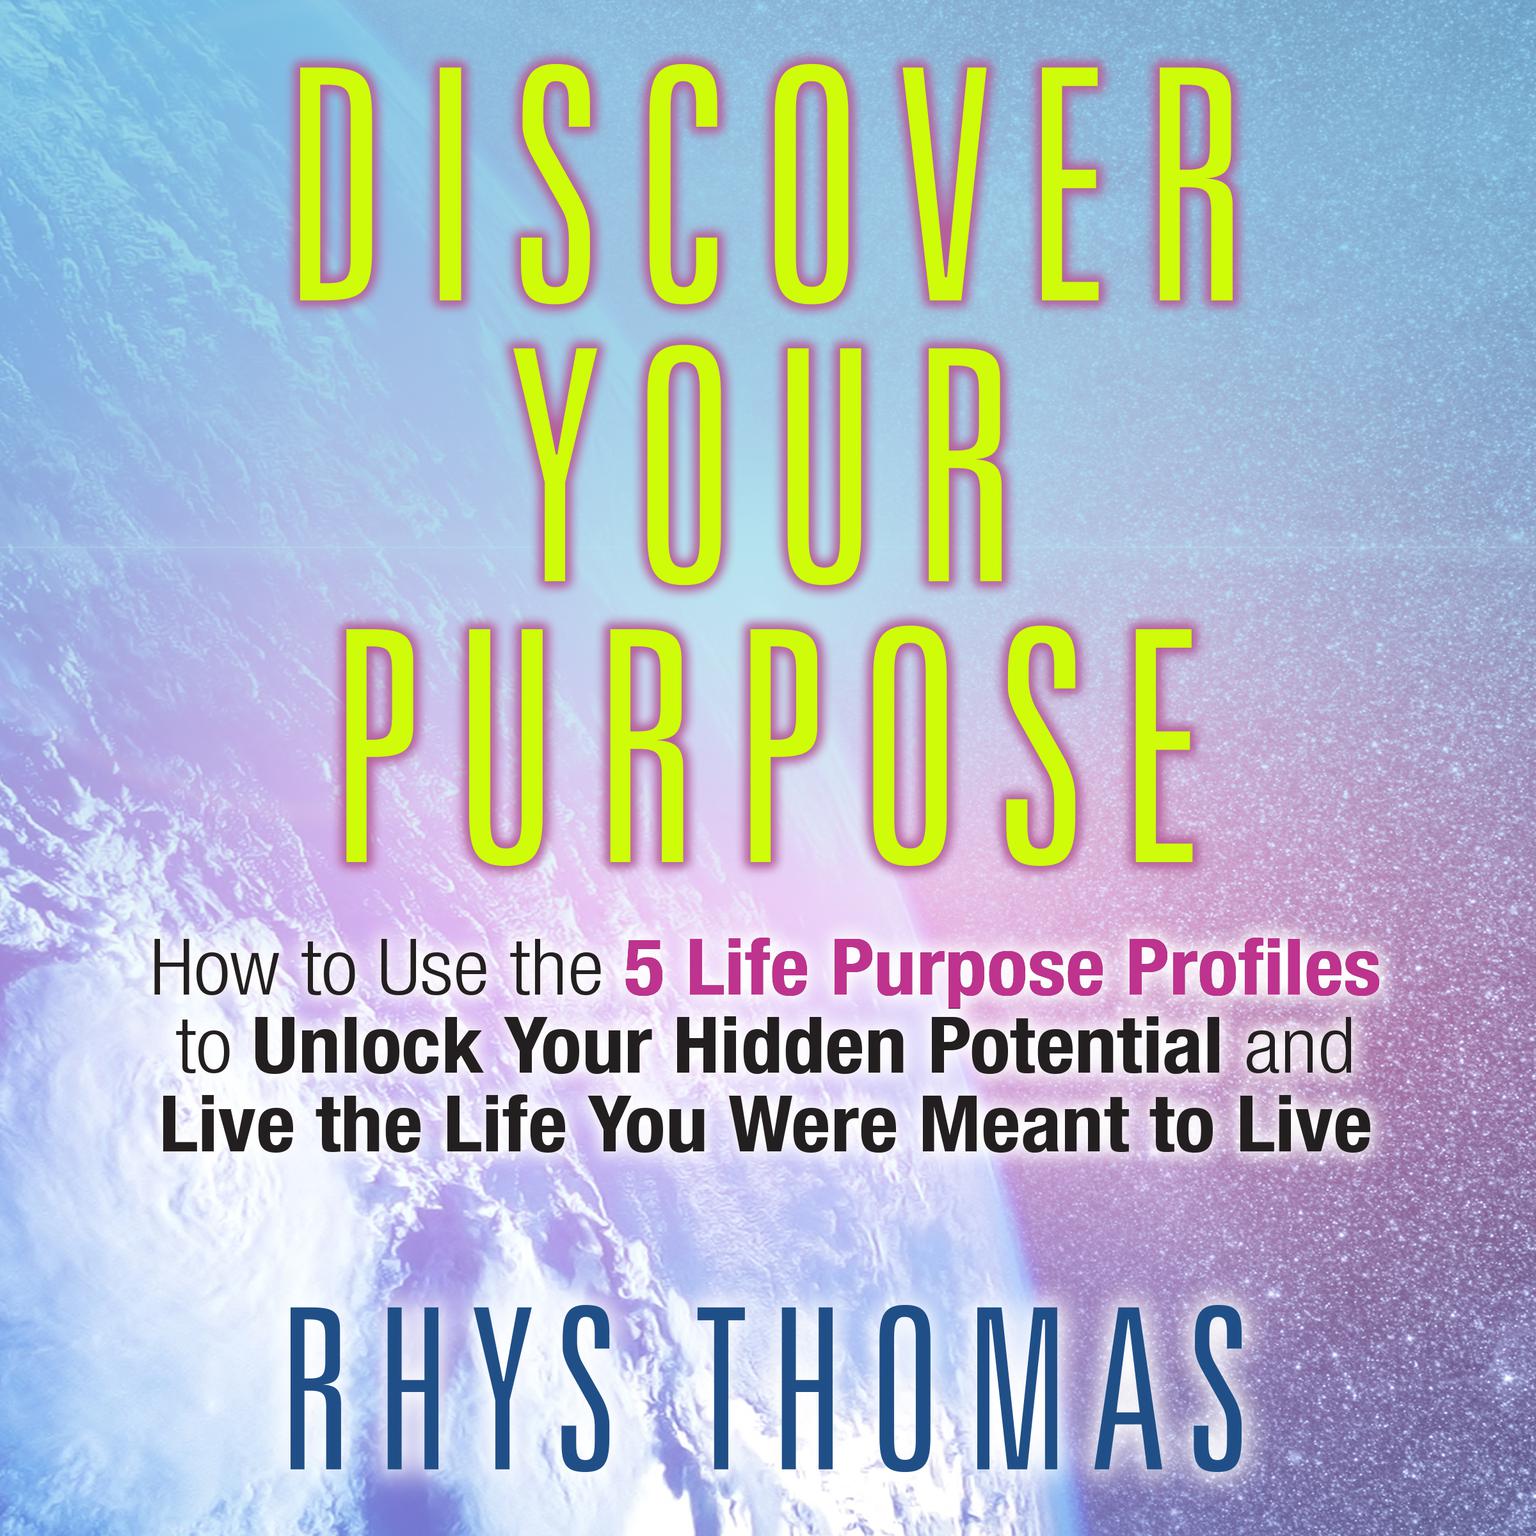 Discover Your Purpose: How to Use the 5 Life Purpose Profiles to Unlock Your Hidden Potential and Live the Life You Were Meant to Live Audiobook, by Rhys Thomas